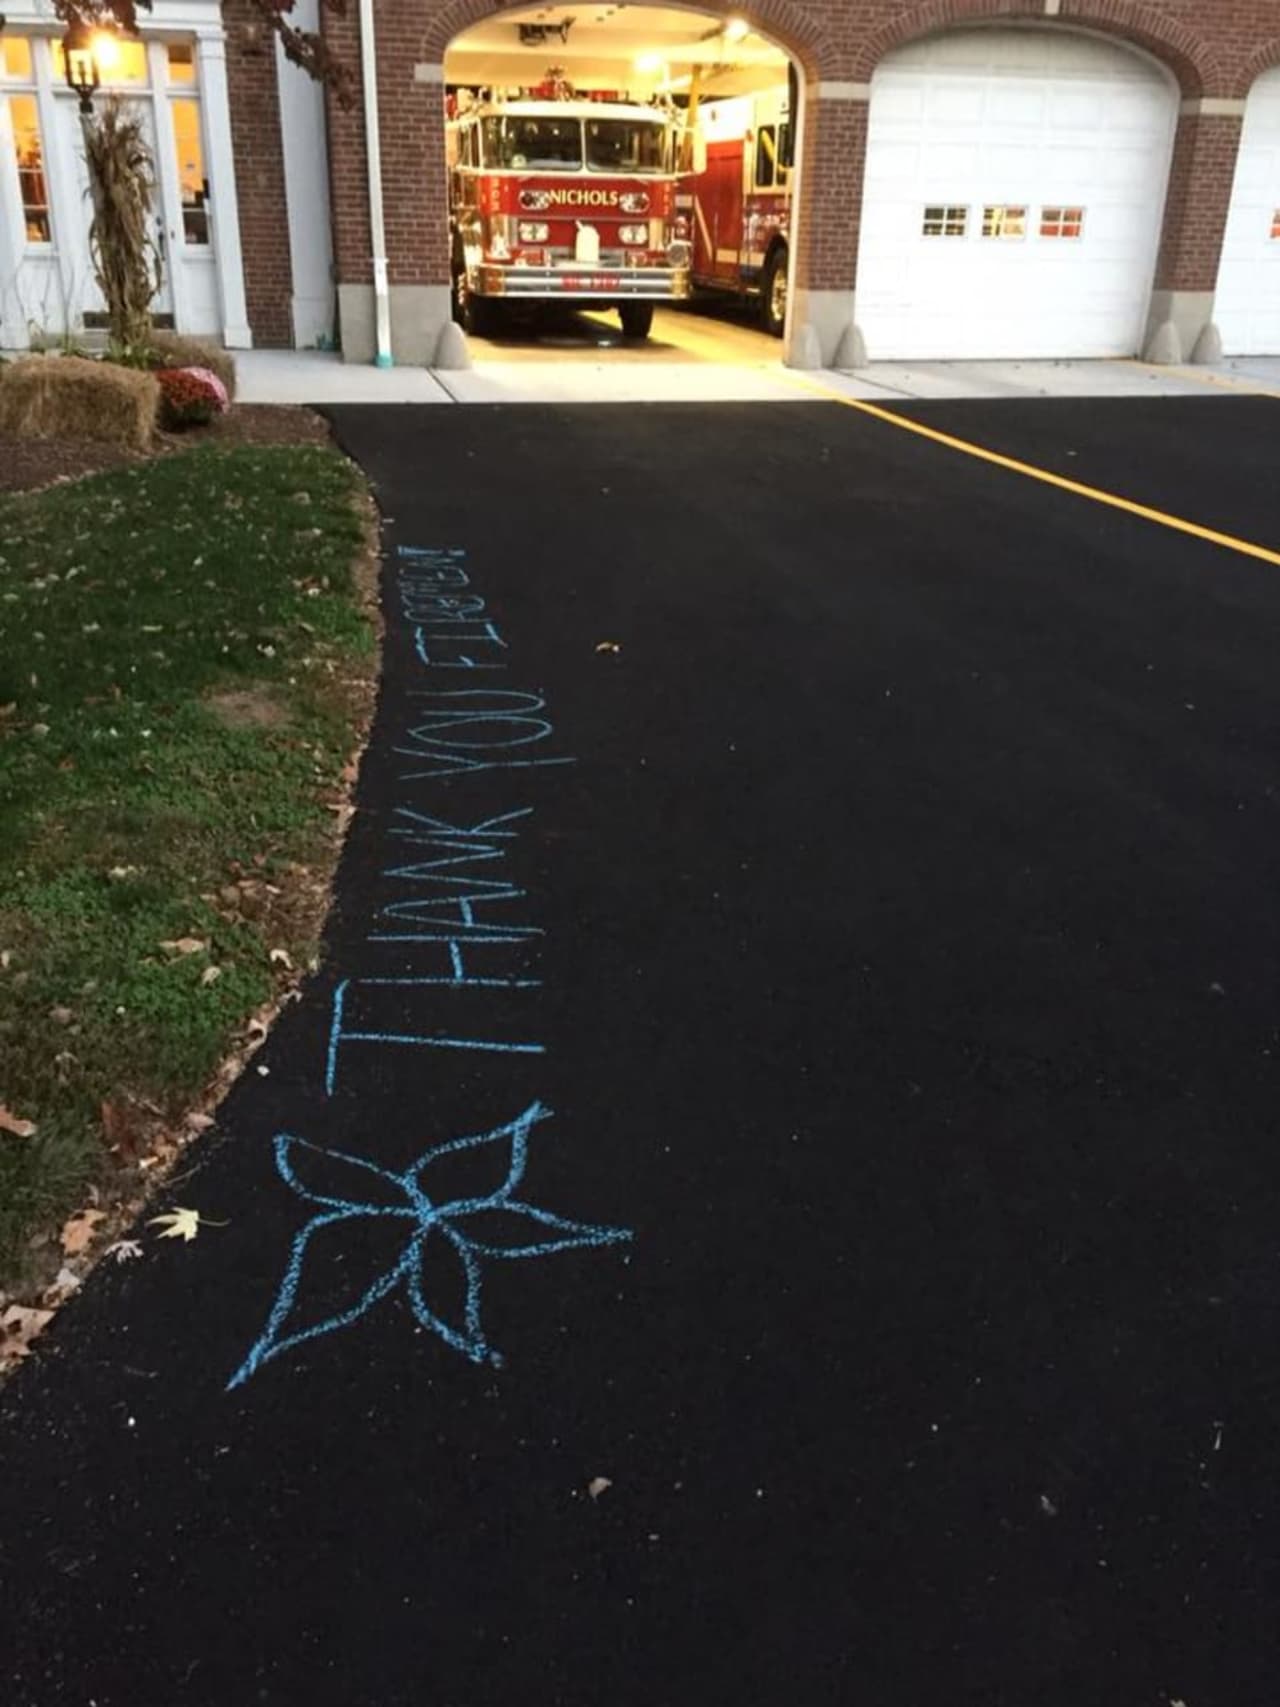 The driveway of the Nichols Fire Department's firehouse was the scene of a Random Act of Kindness early Tuesday.